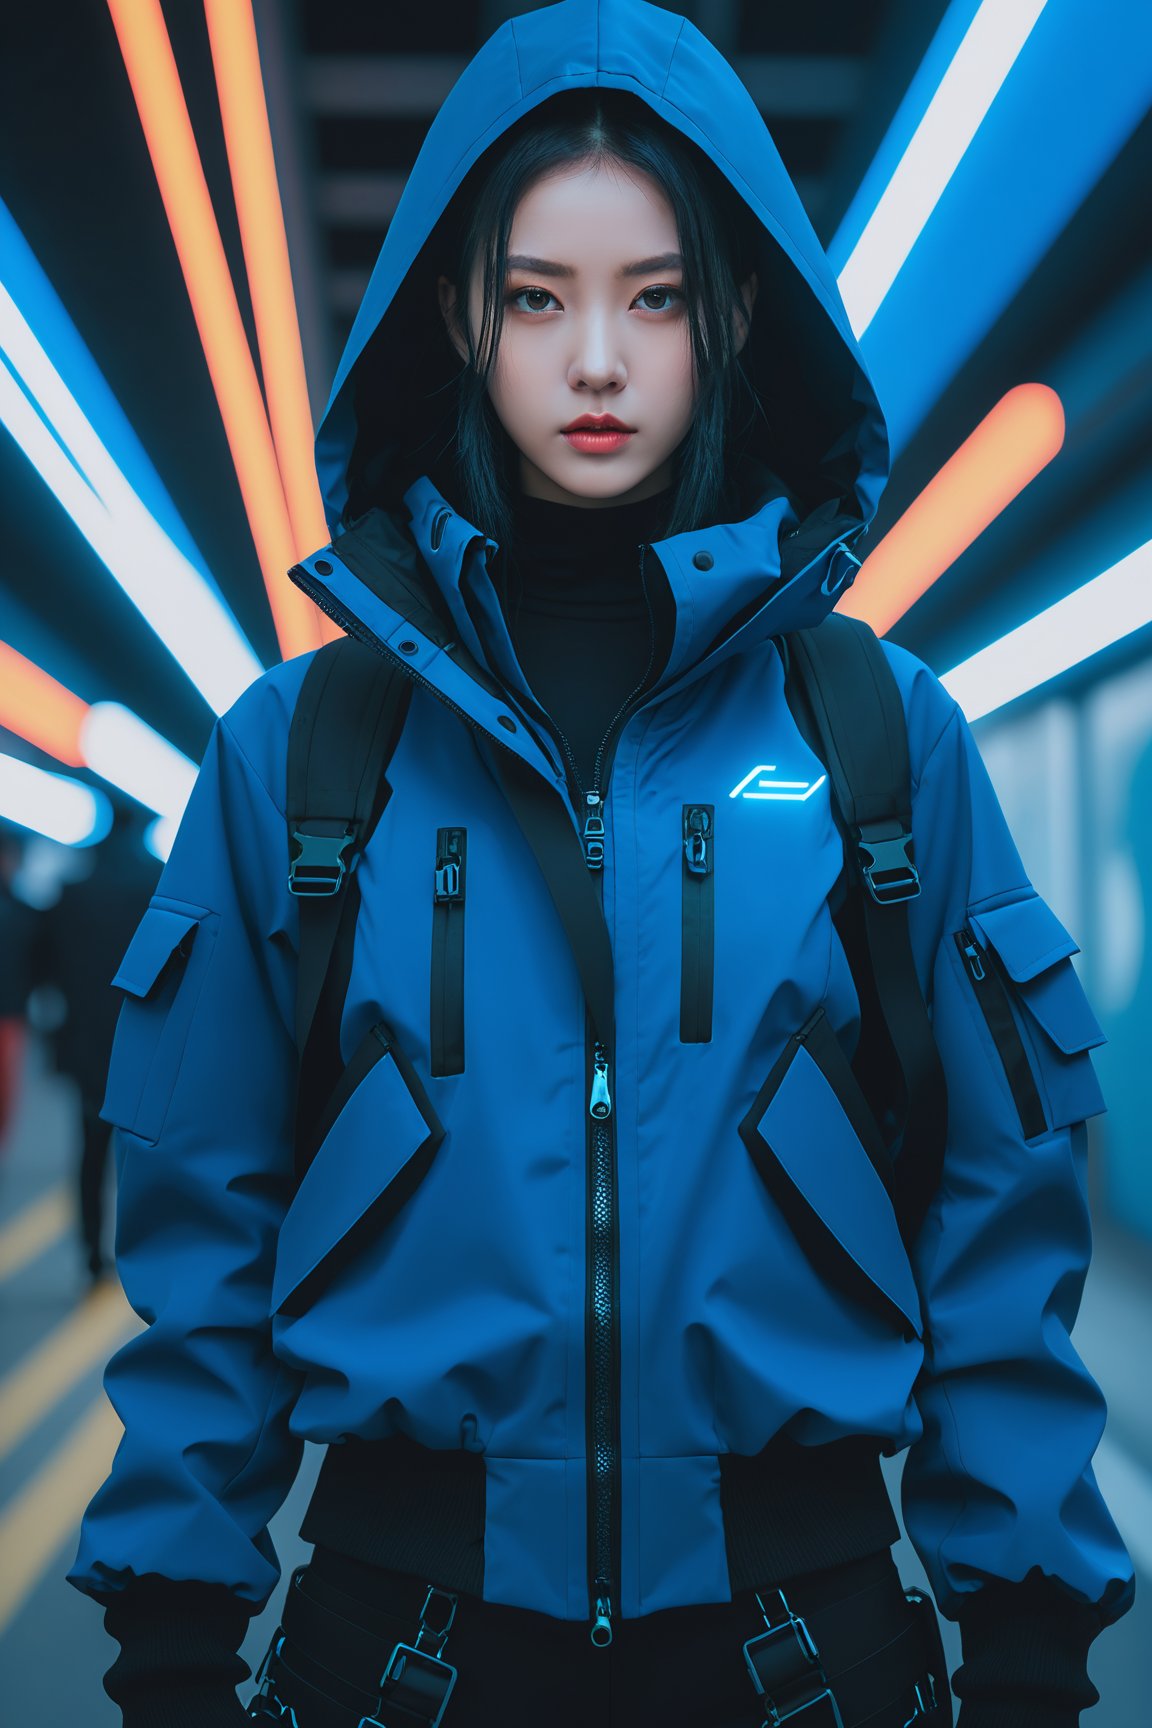 Techwear fashion a young woman, looking at the camera, posing, ulzzang, naver fanpop, ffffound, streaming on twitch, character album cover, blues moment, style of Alessio Albi, daily wear, moody lighting, appropriate comparison of cold and warm, reality,  . Futuristic,  cyberpunk,  urban,  tactical,  sleek,  dark,  highly detailed